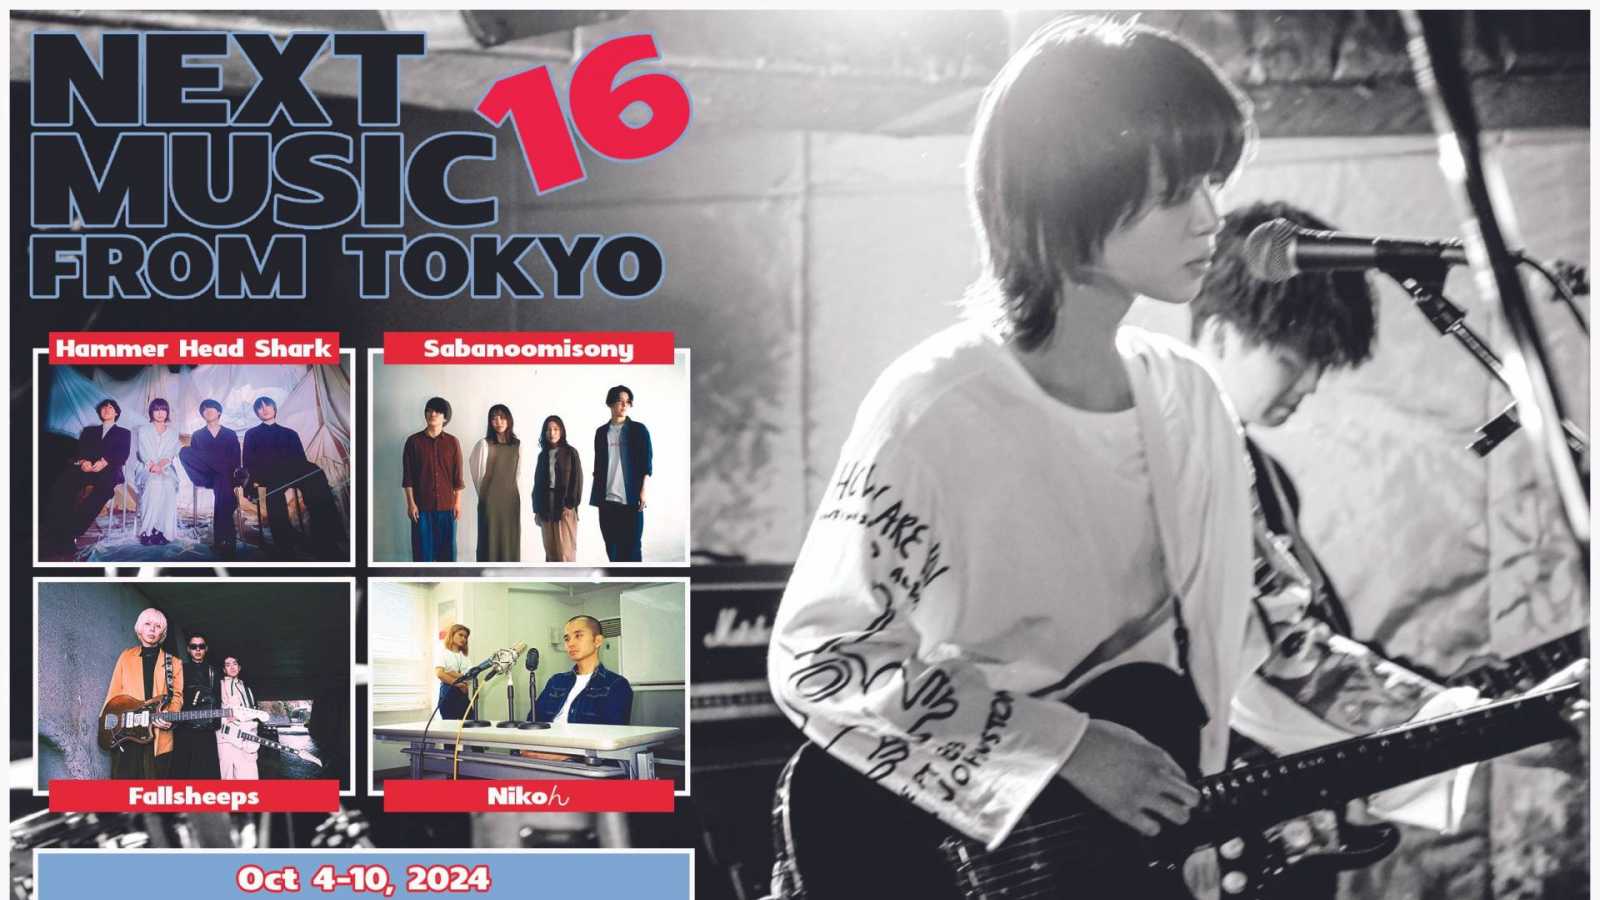 The Next Music from Tokyo Tour to Return to Canada for Vol. 16